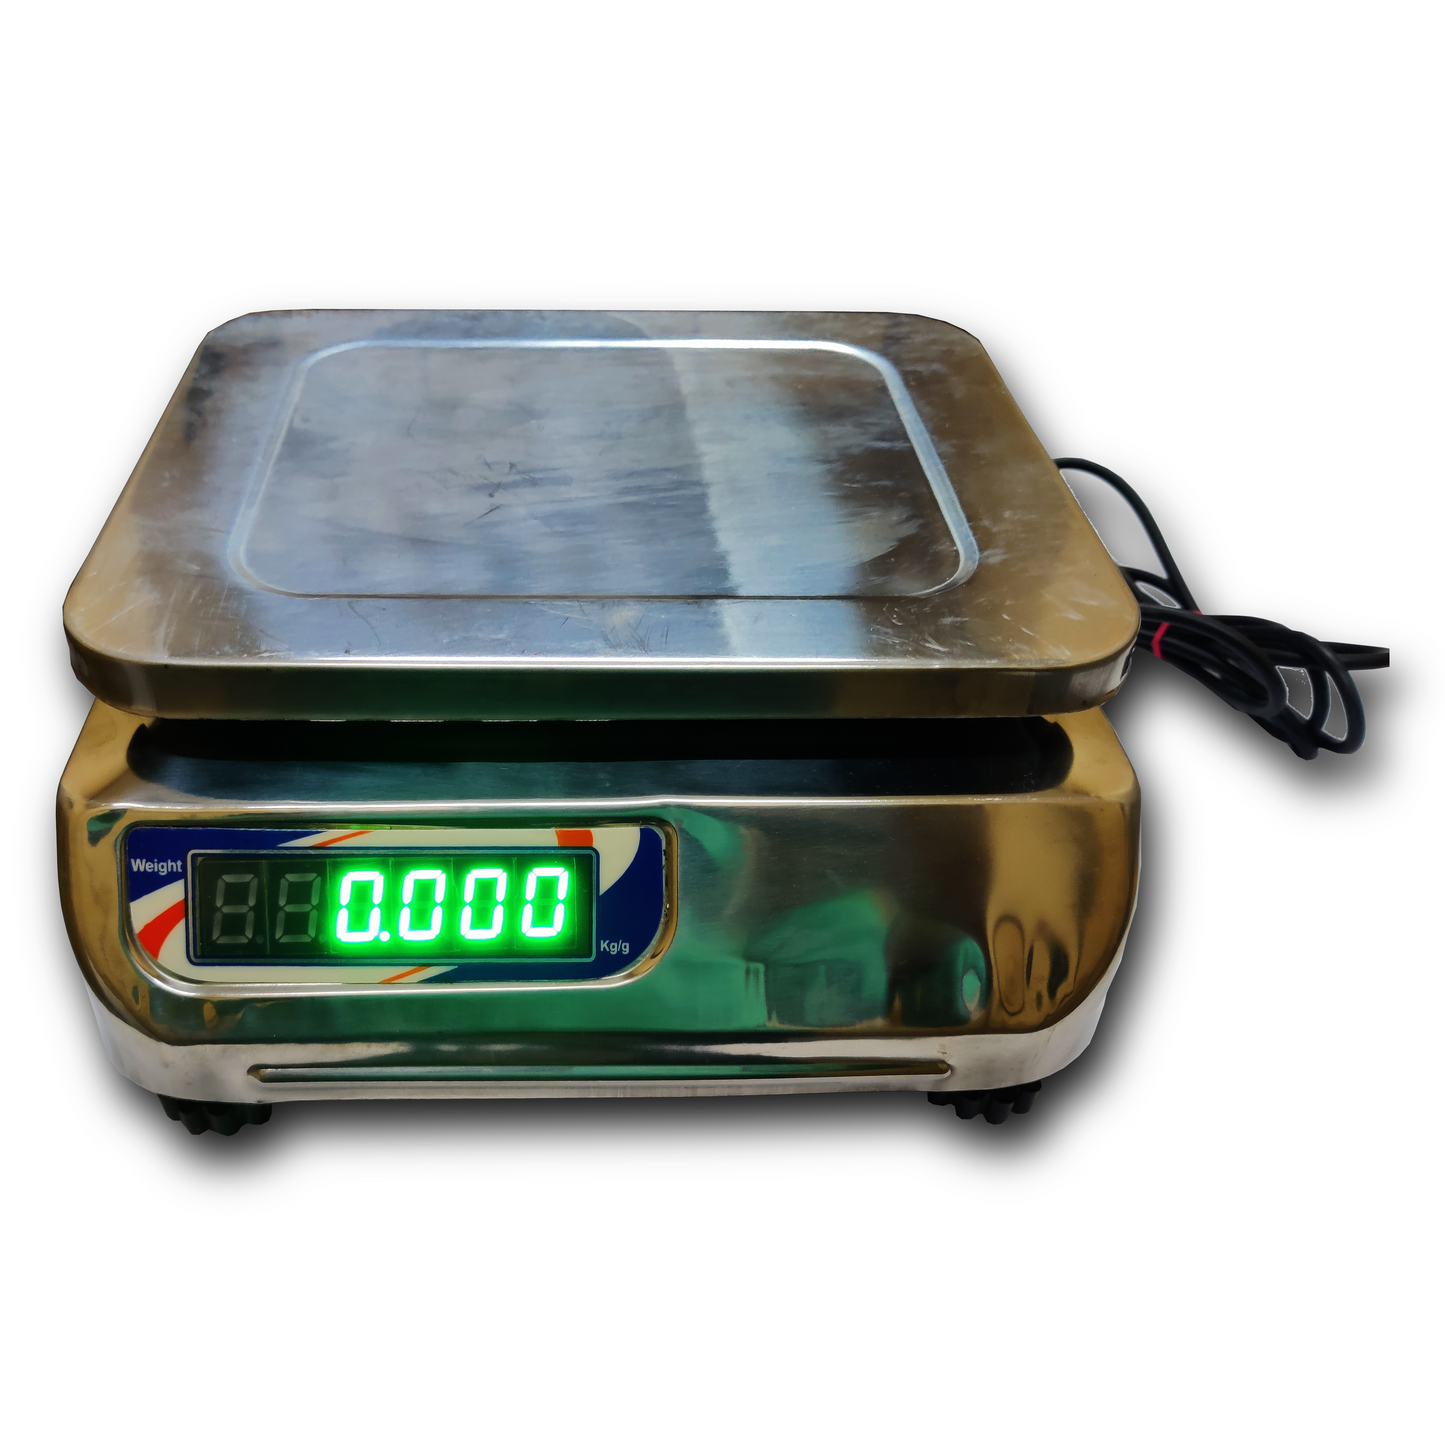 Aranze 30kg x 2 g Digital Table Top Weighing Scale with Front and Back Display Pan for Retail Shops, Kitchen and Commercial Purposes (9x7 inches, Stainless Steel)